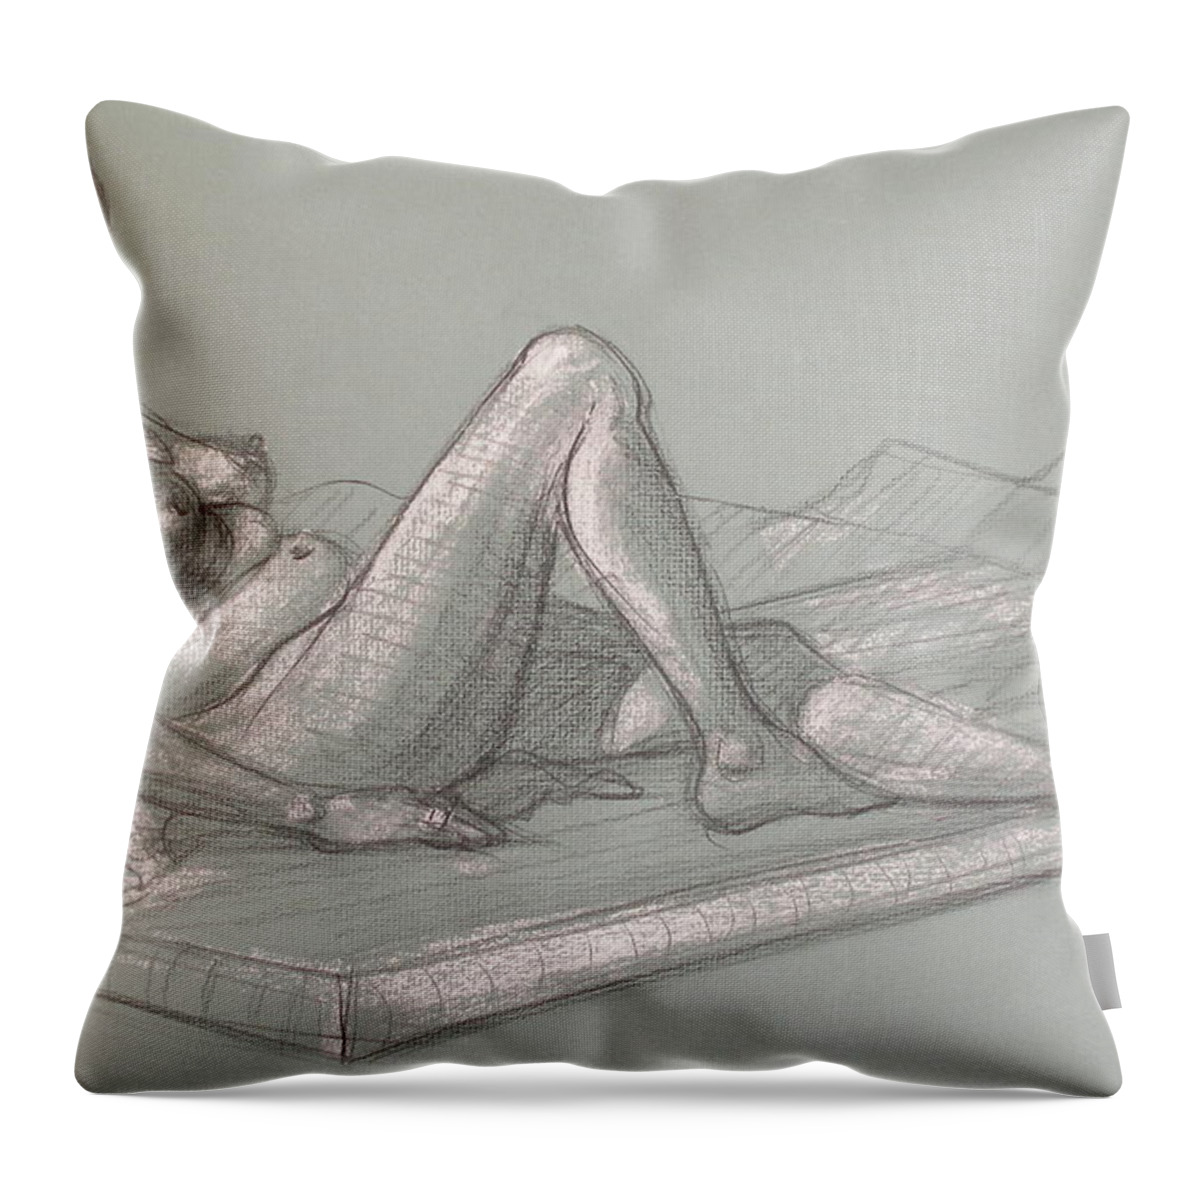 Realism Throw Pillow featuring the drawing Lori Reclining 2016 by Donelli DiMaria